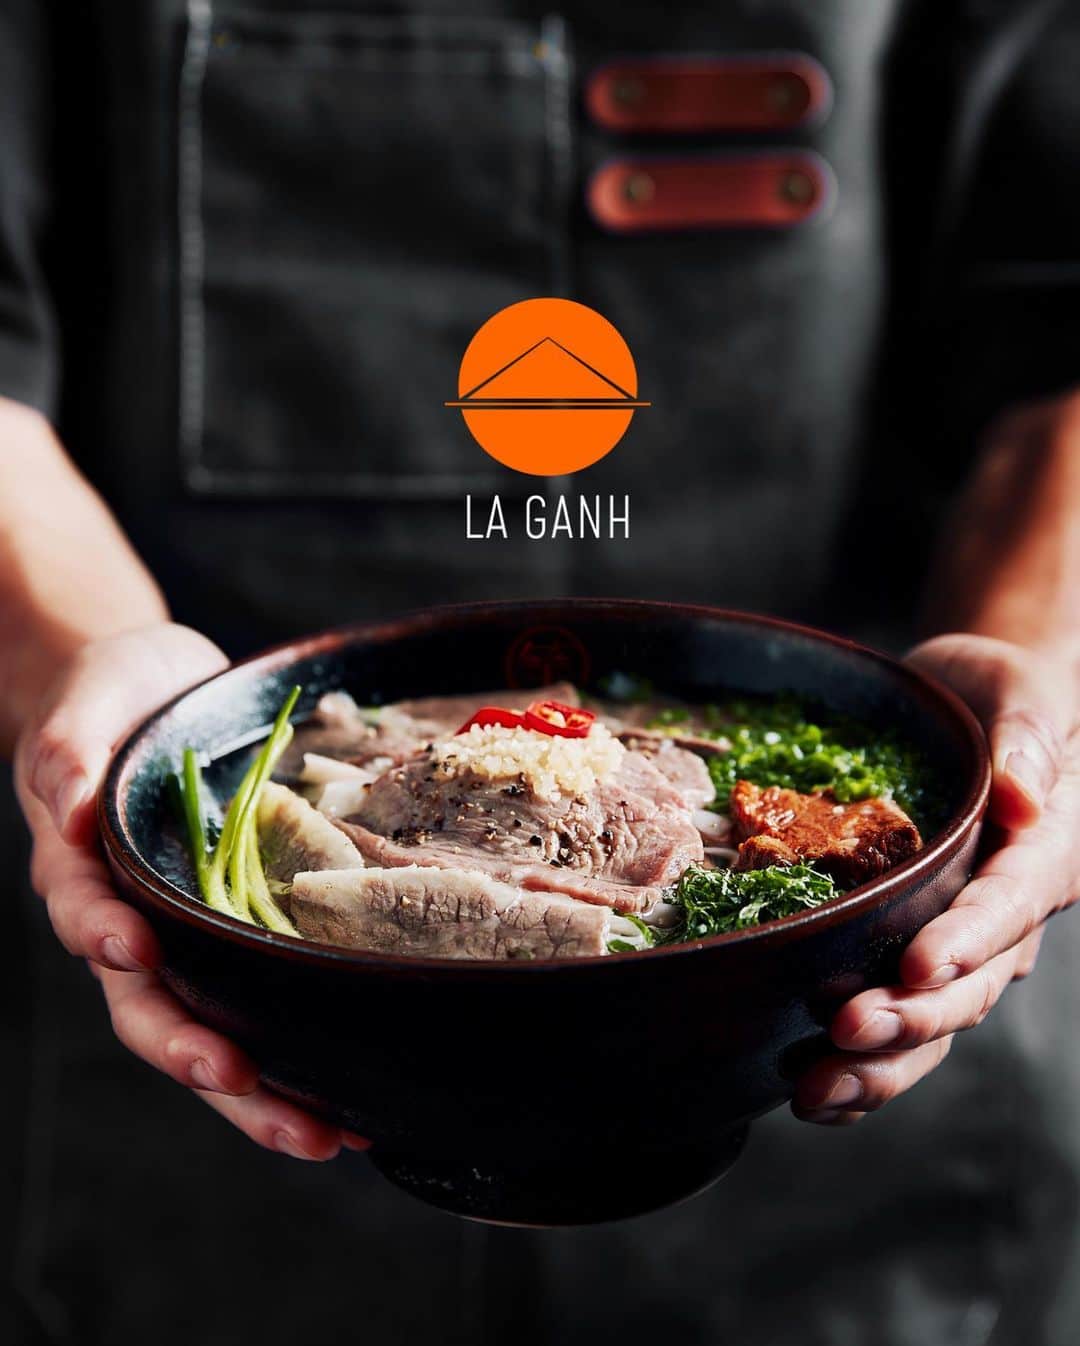 Chi Puのインスタグラム：「After months of preparation, my restaurant @la_ganh is set to make its grand debut in Shanghai! 🎉 Behind La Ganh lies the incredible journey of three passionate women. Big shoutout to Chengling and Helen! 🙌 Without these two incredible souls, none of this would have been possible. 🌟 We're thrilled to share the finest Northern Pho with all of you! 🍲✨ Join us when it is officially open! You won't want to miss this culinary adventure!  📍La Ganh : no.425 Yanping road, Shanghai, China  #laganh #NothernPho #LaGanhOpening #Shanghai」